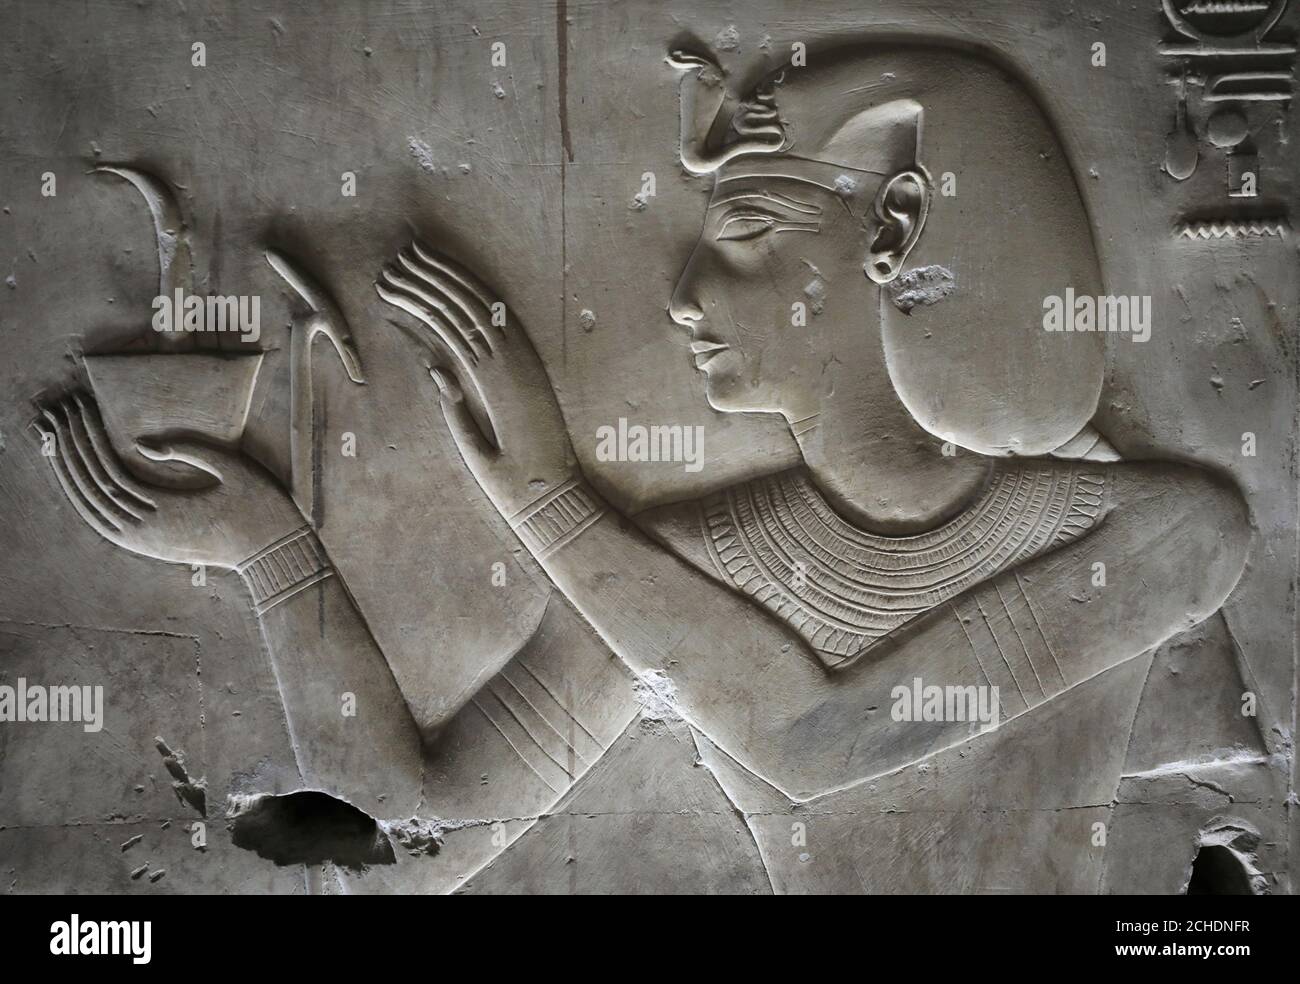 ancient egyptian relief sculpture